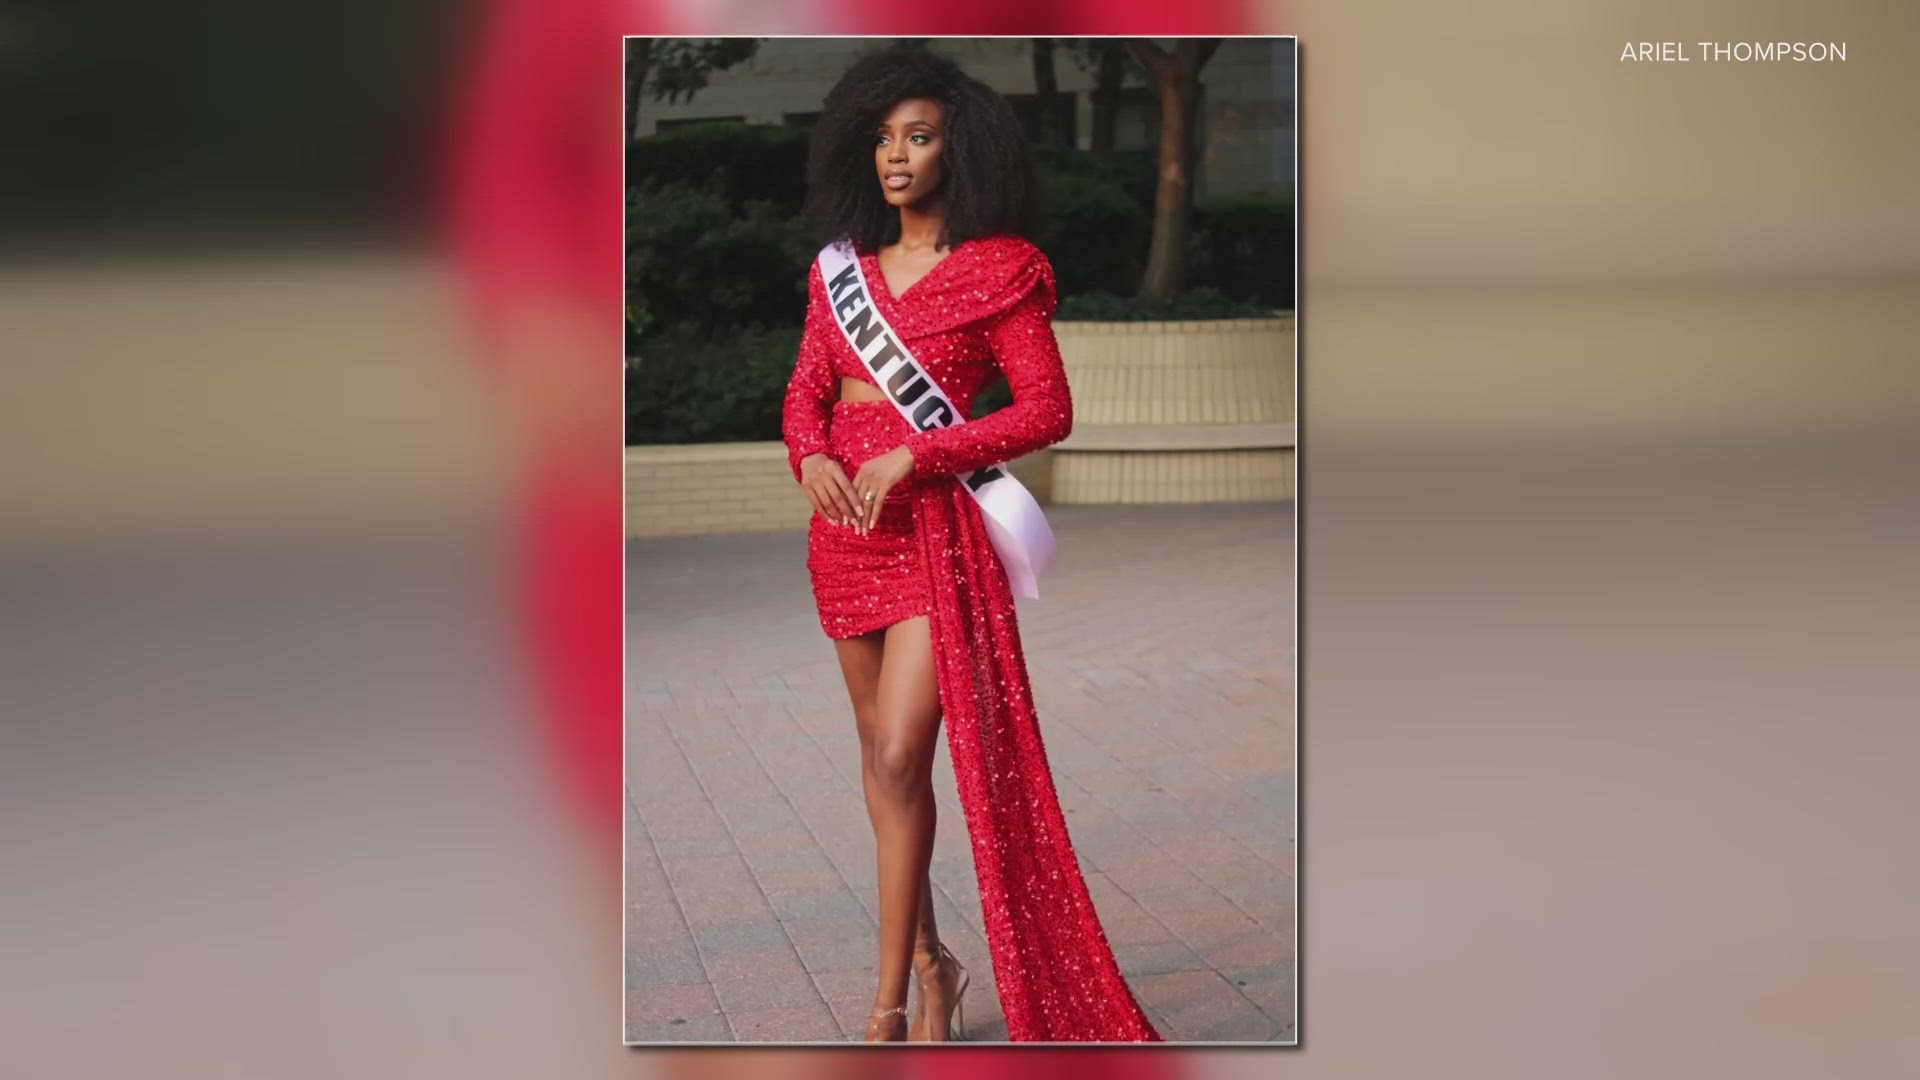 Ariel Thompson and Gia Combs took home top honors in the Miss Black USA and Miss Cosmos United States over the weekend.